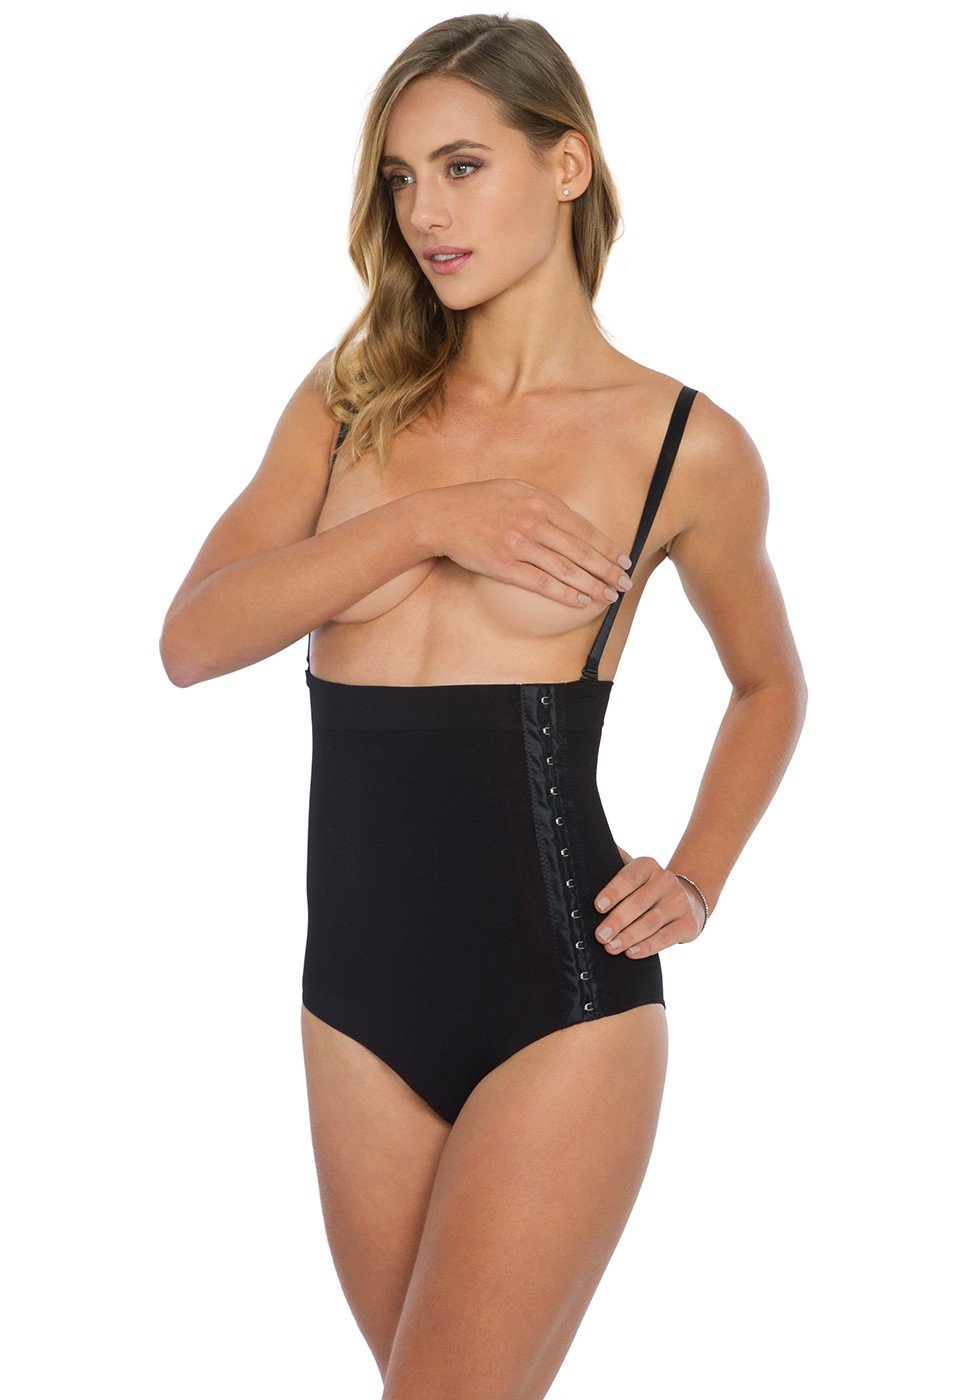 Introducing Plié Shapewear from Brazil to South Africa! Are you lookin